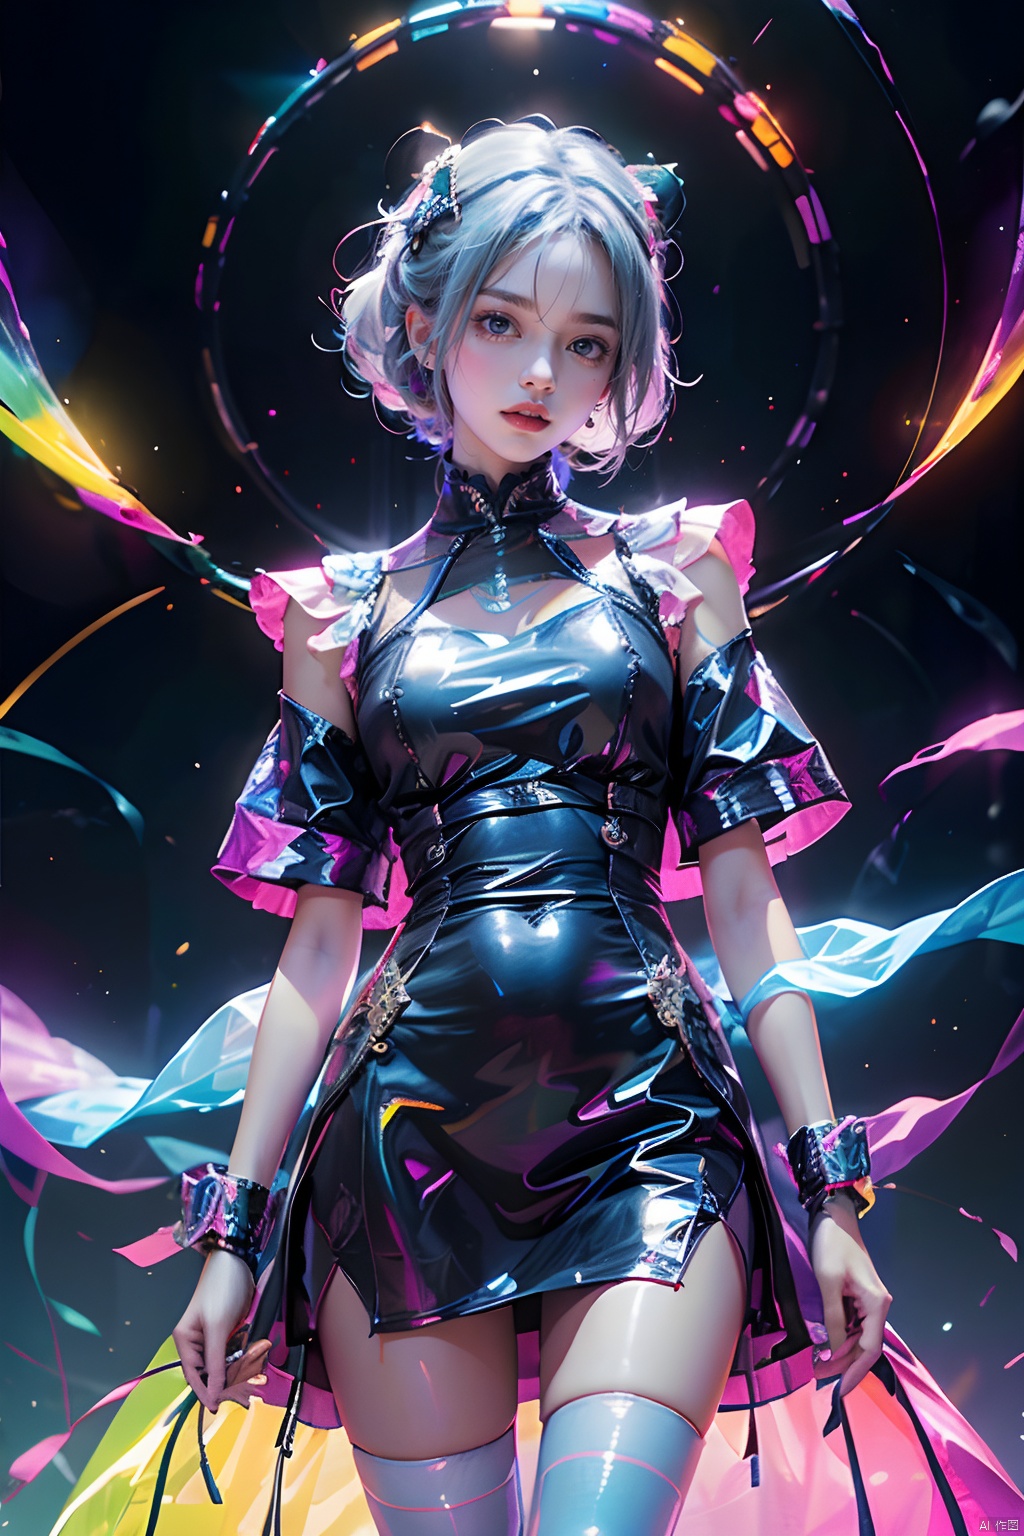 Best quality,masterpiece,transparent color PVC clothing,transparent color vinyl clothing,prismatic,holographic,chromatic aberration,fashion illustration,masterpiece,girl with harajuku fashion,looking at viewer,8k,ultra detailed,pixiv,
